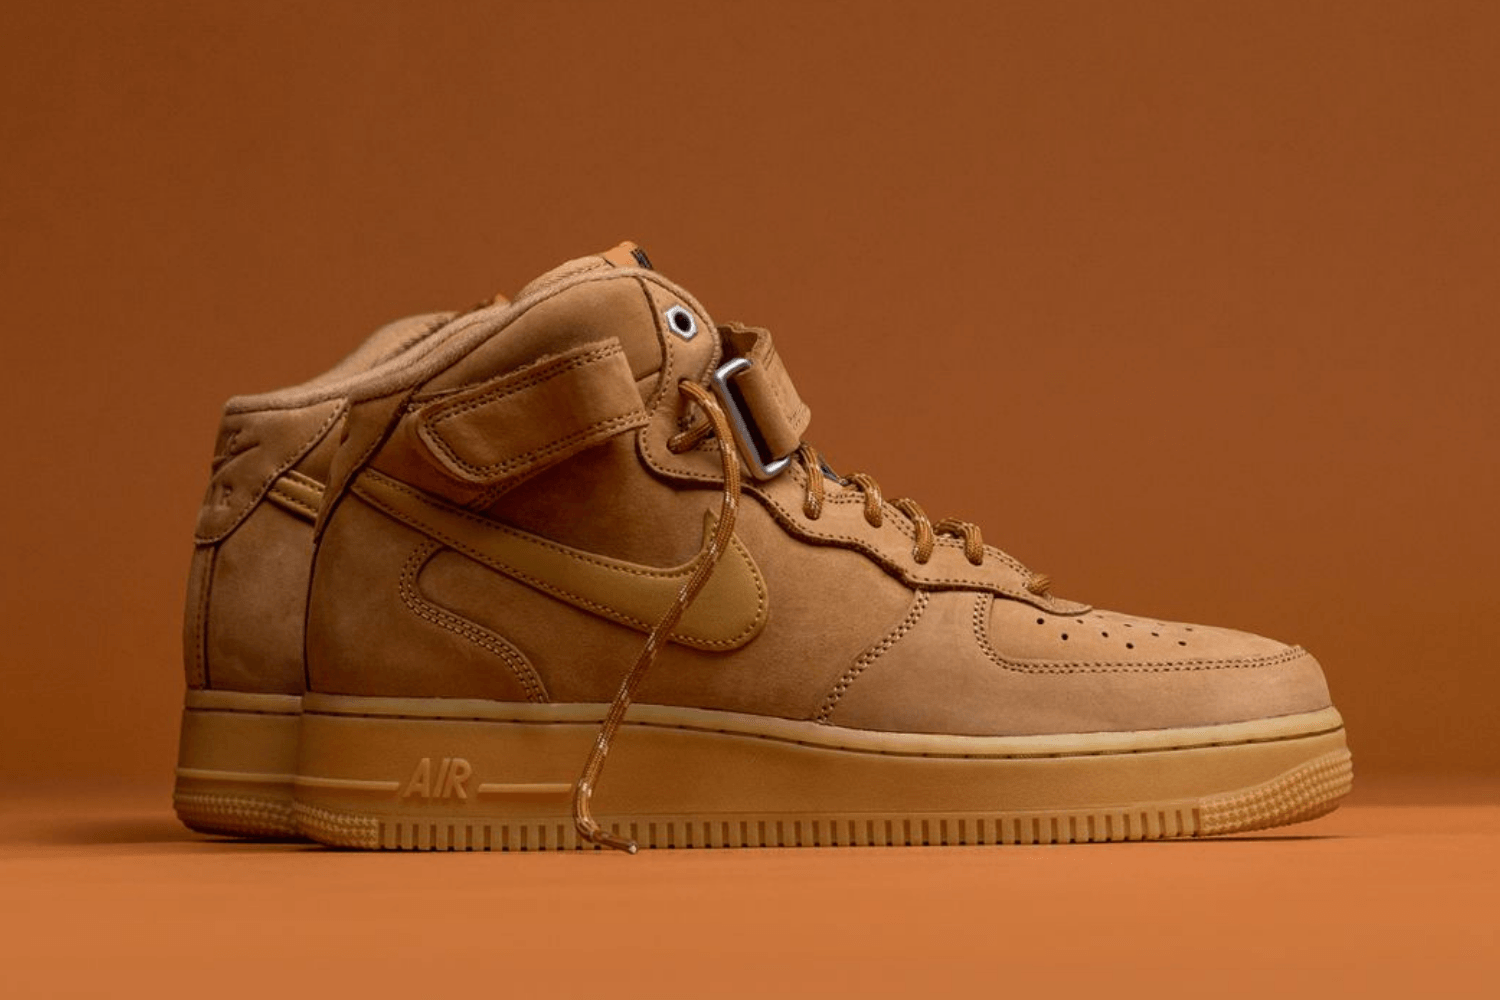 Our Nike Air Force 1 Winter Favourites